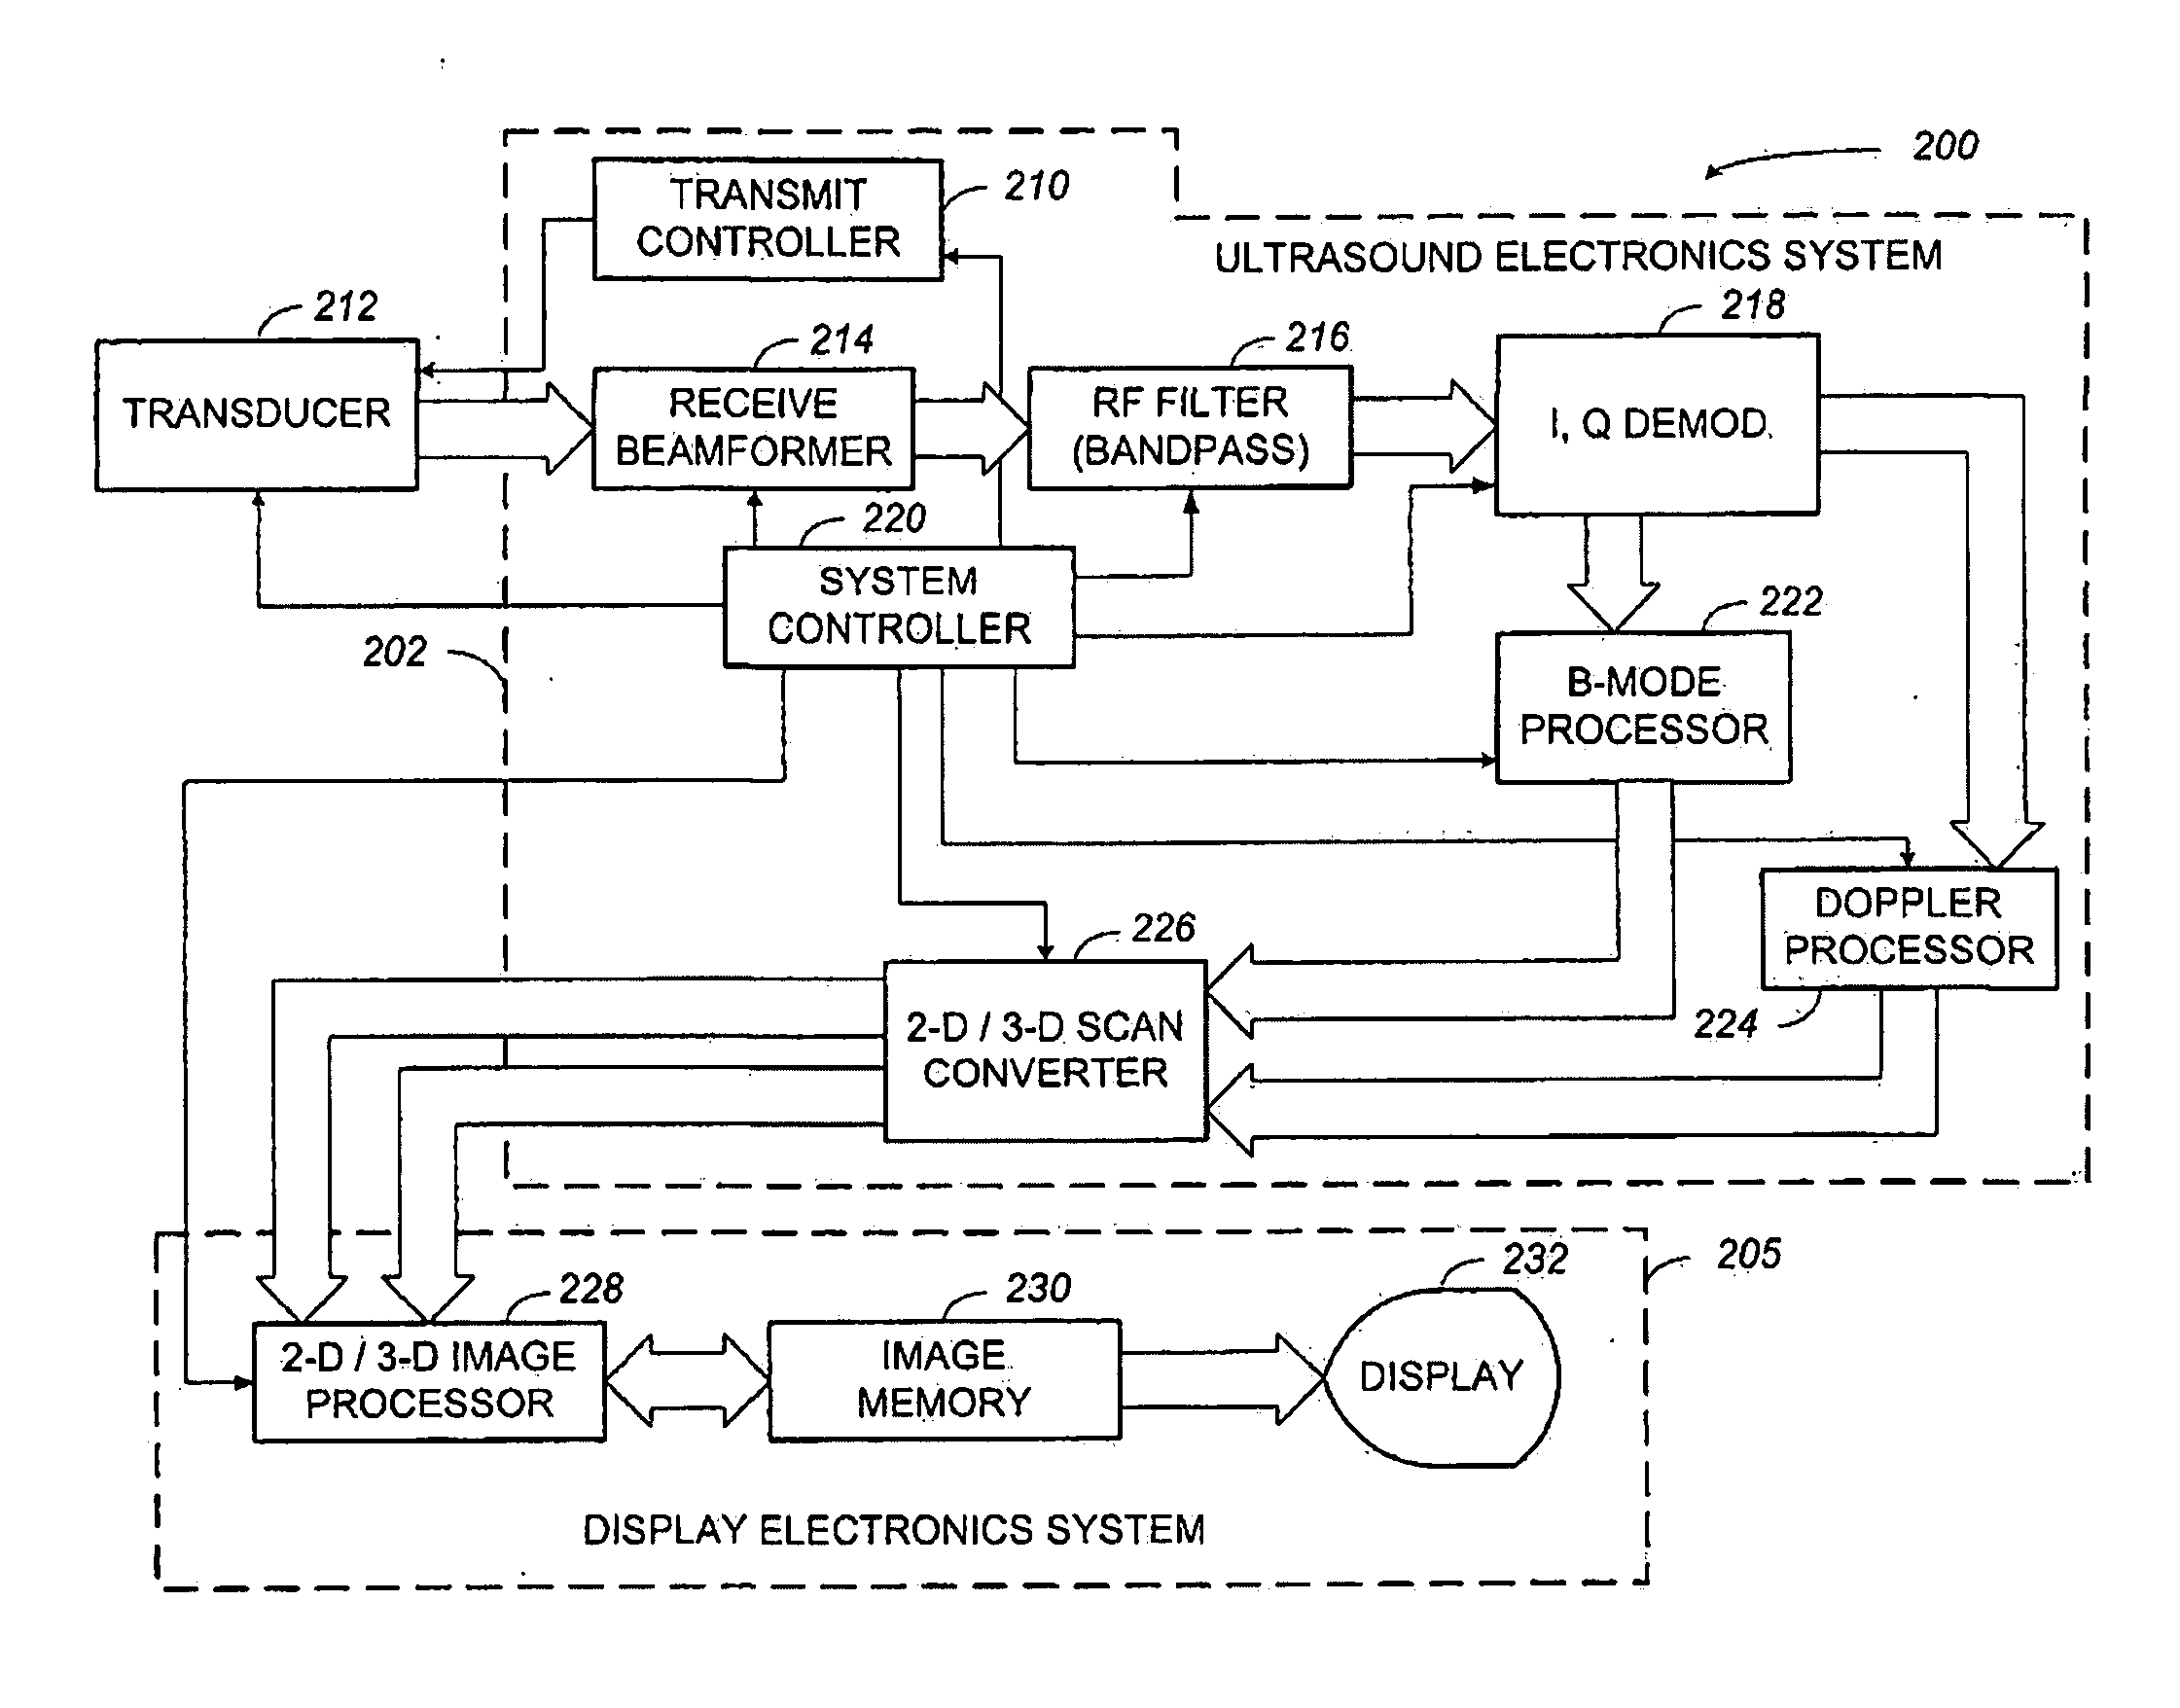 Ultrasound-imaging systems and methods for a user-guided three-dimensional volume-scan sequence